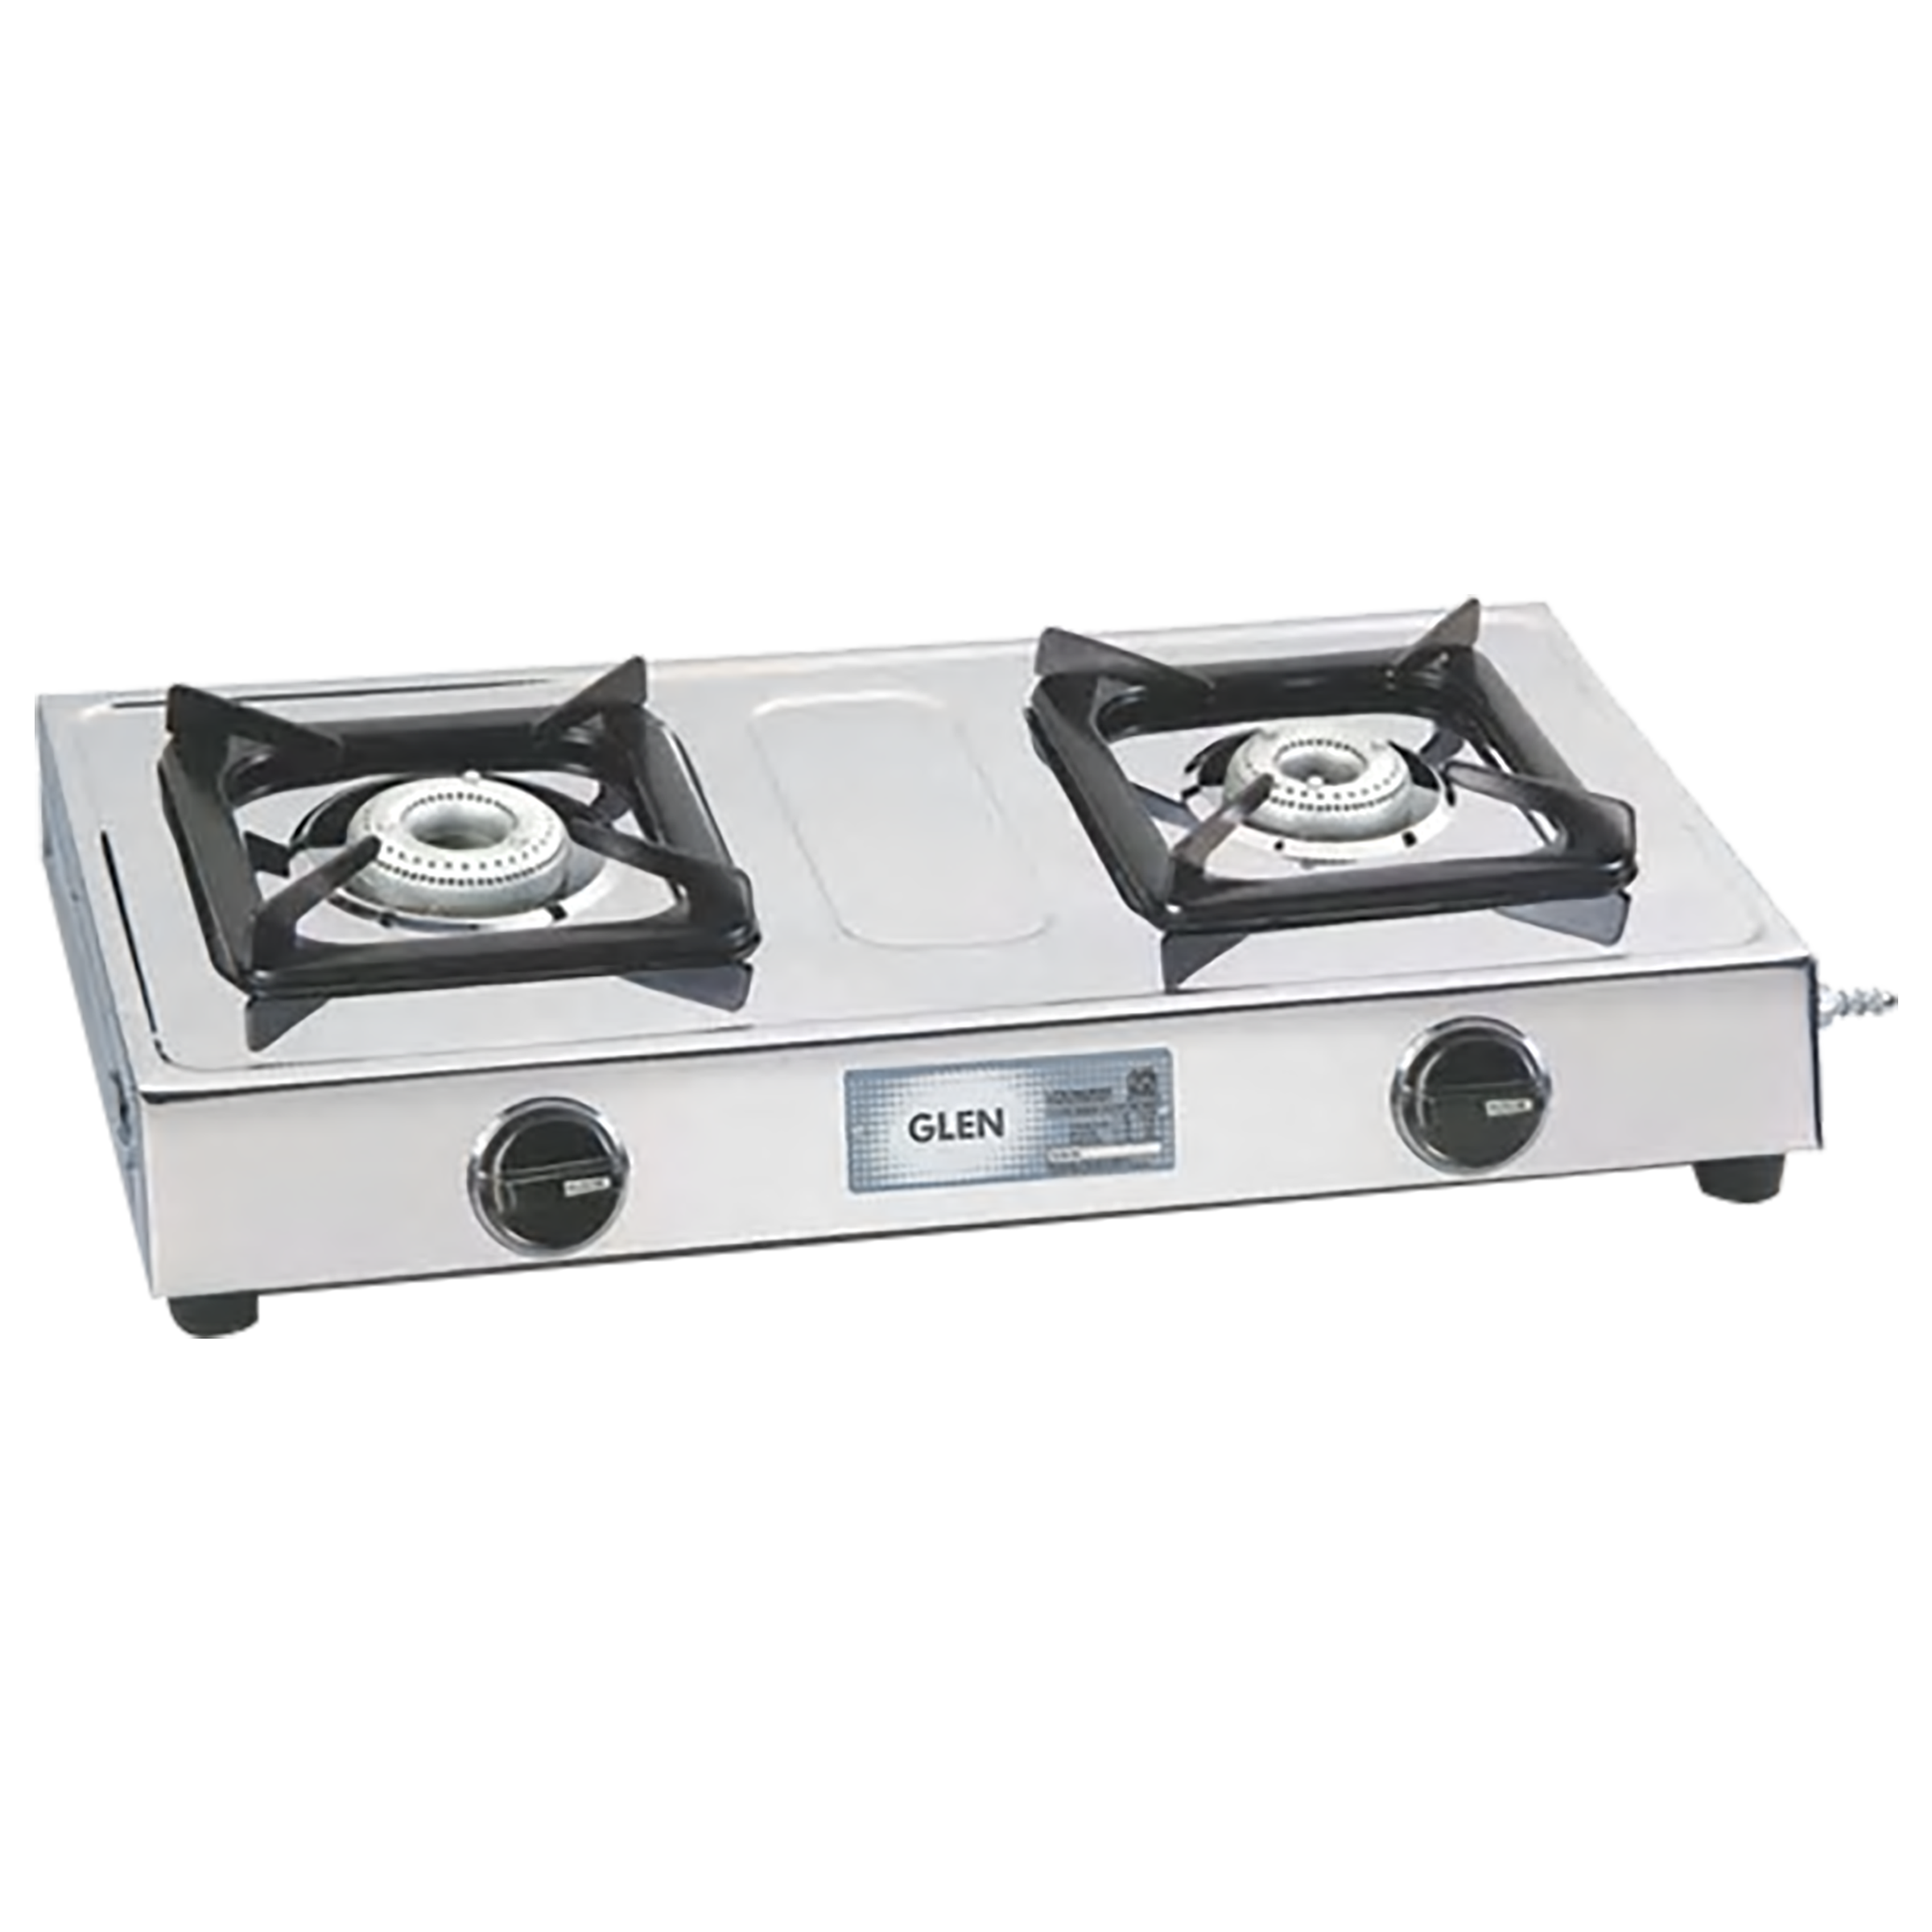 Glen CT1020SSAL 2 Burner Stainless Steel Gas Stove (MS Pan Supports, Silver)_1